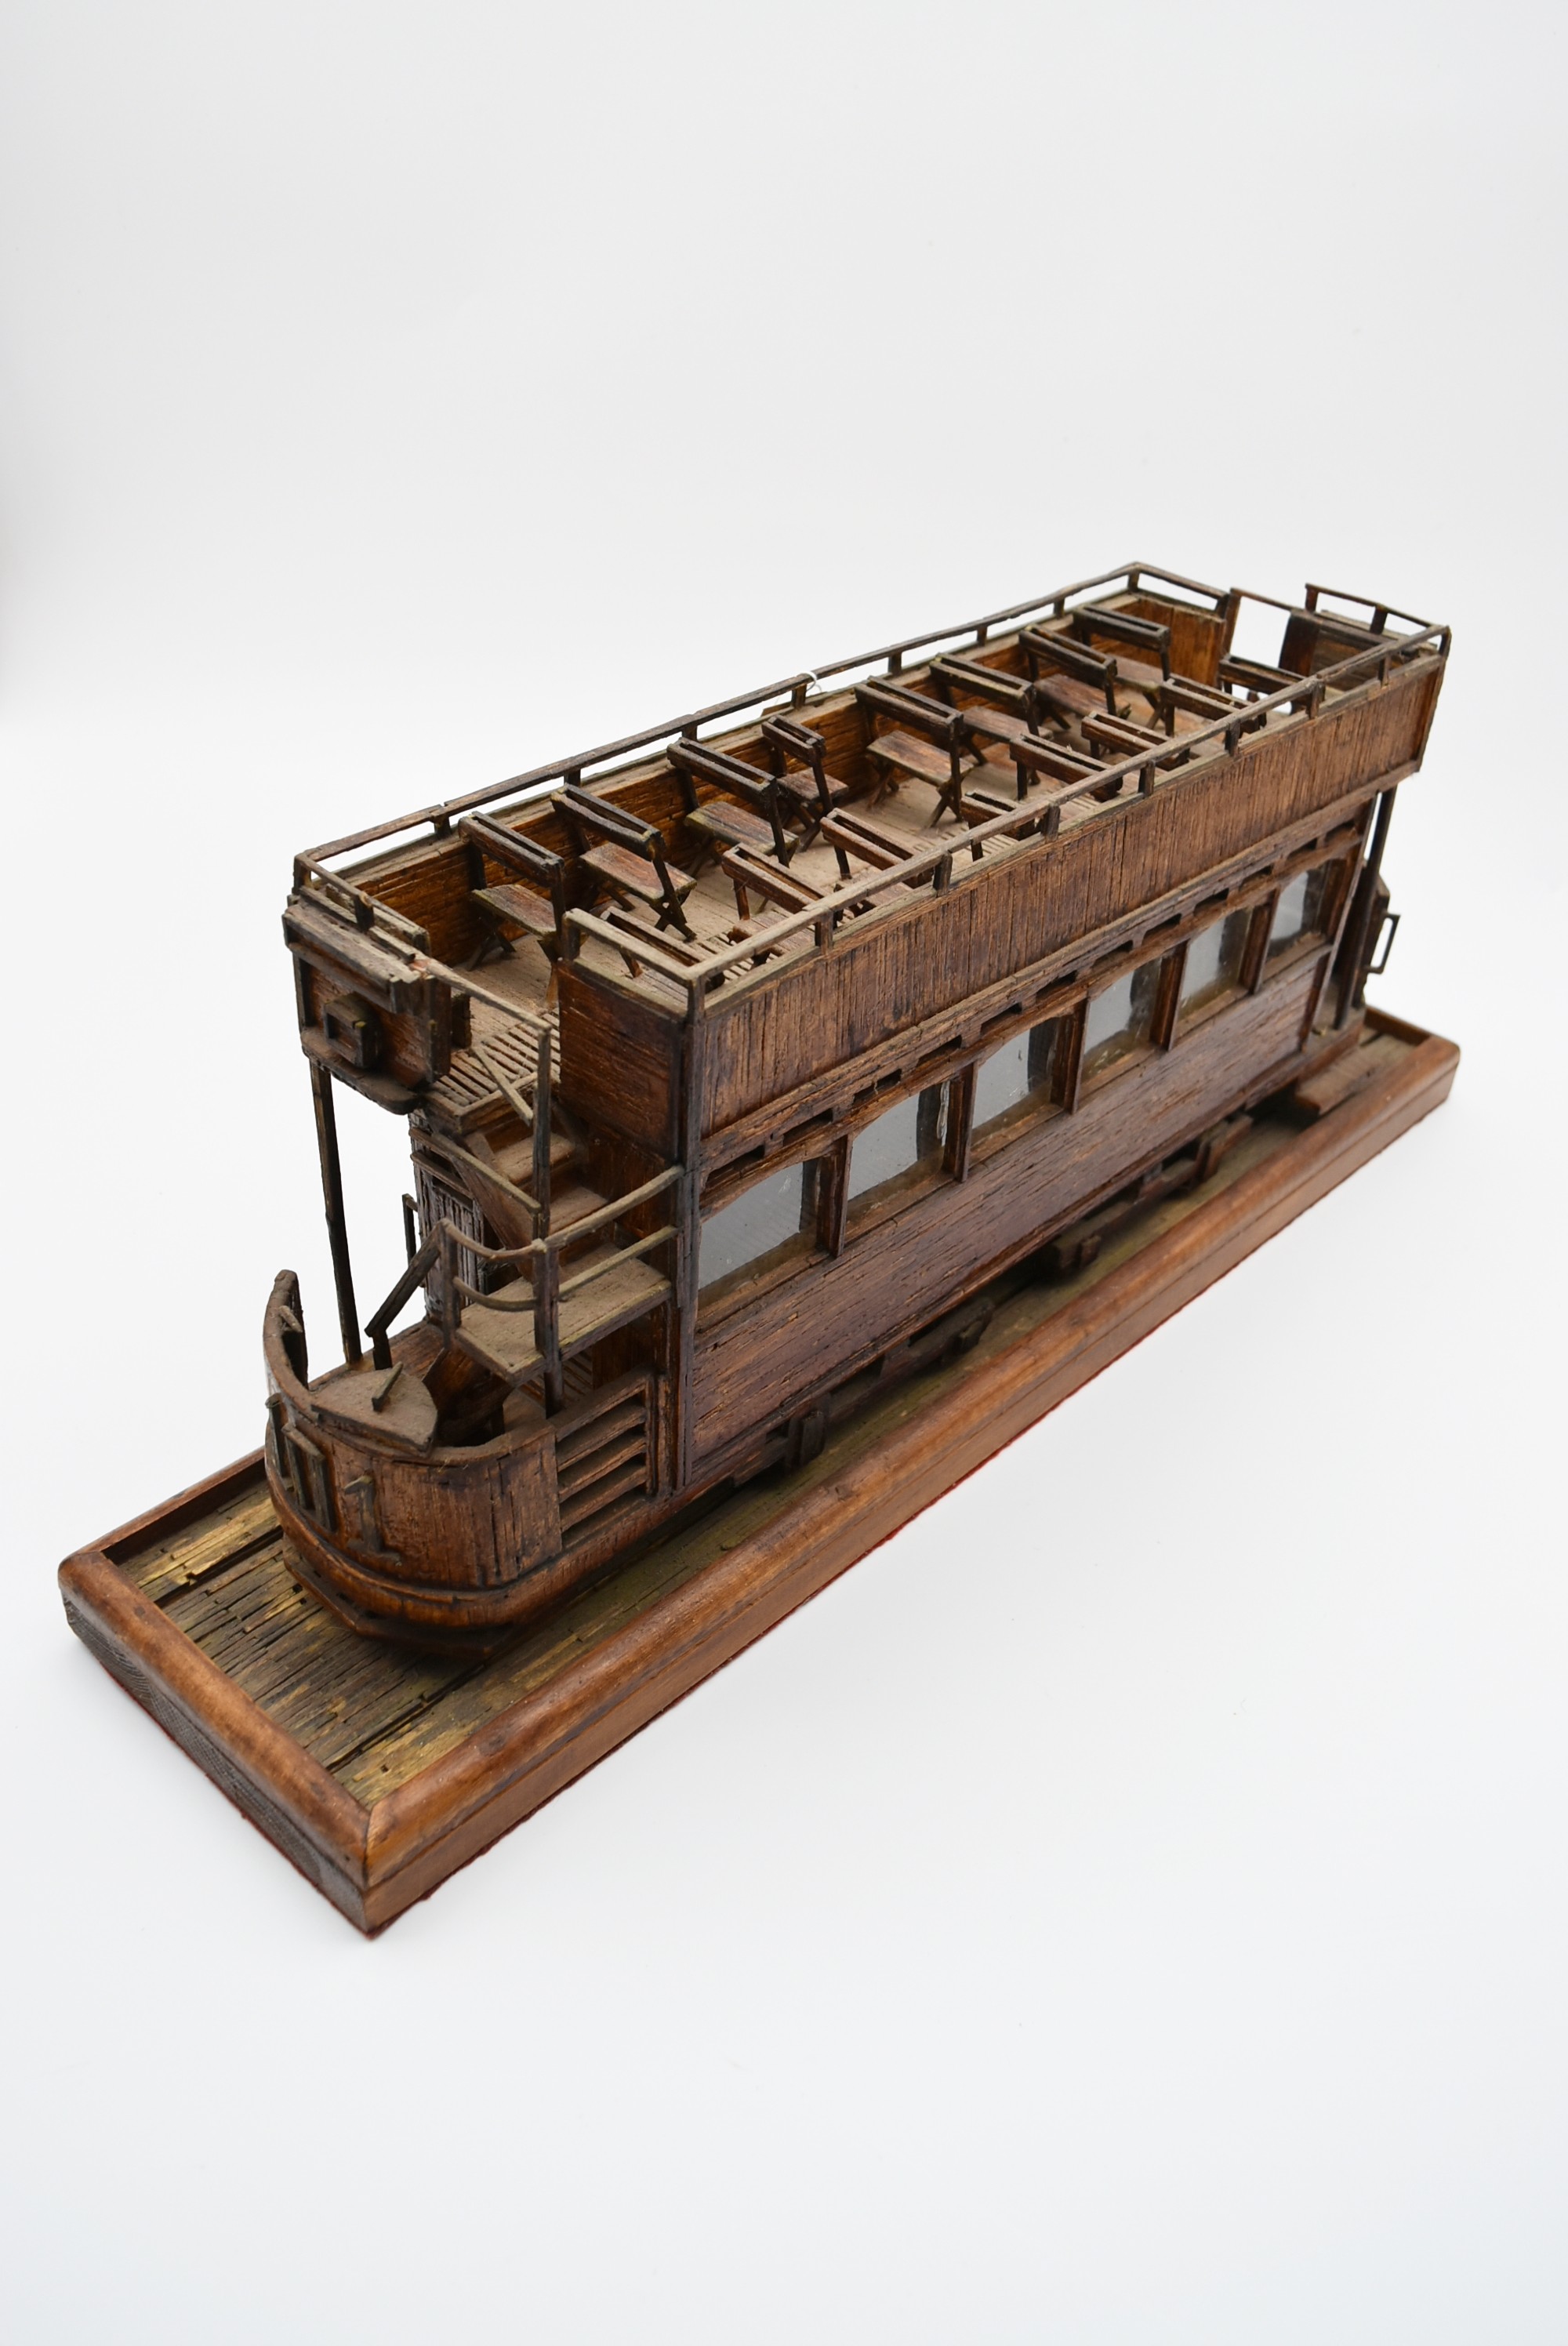 A 19th century style open topped tram made from matchsticks. H.24 W.60 D.15cm - Image 5 of 7